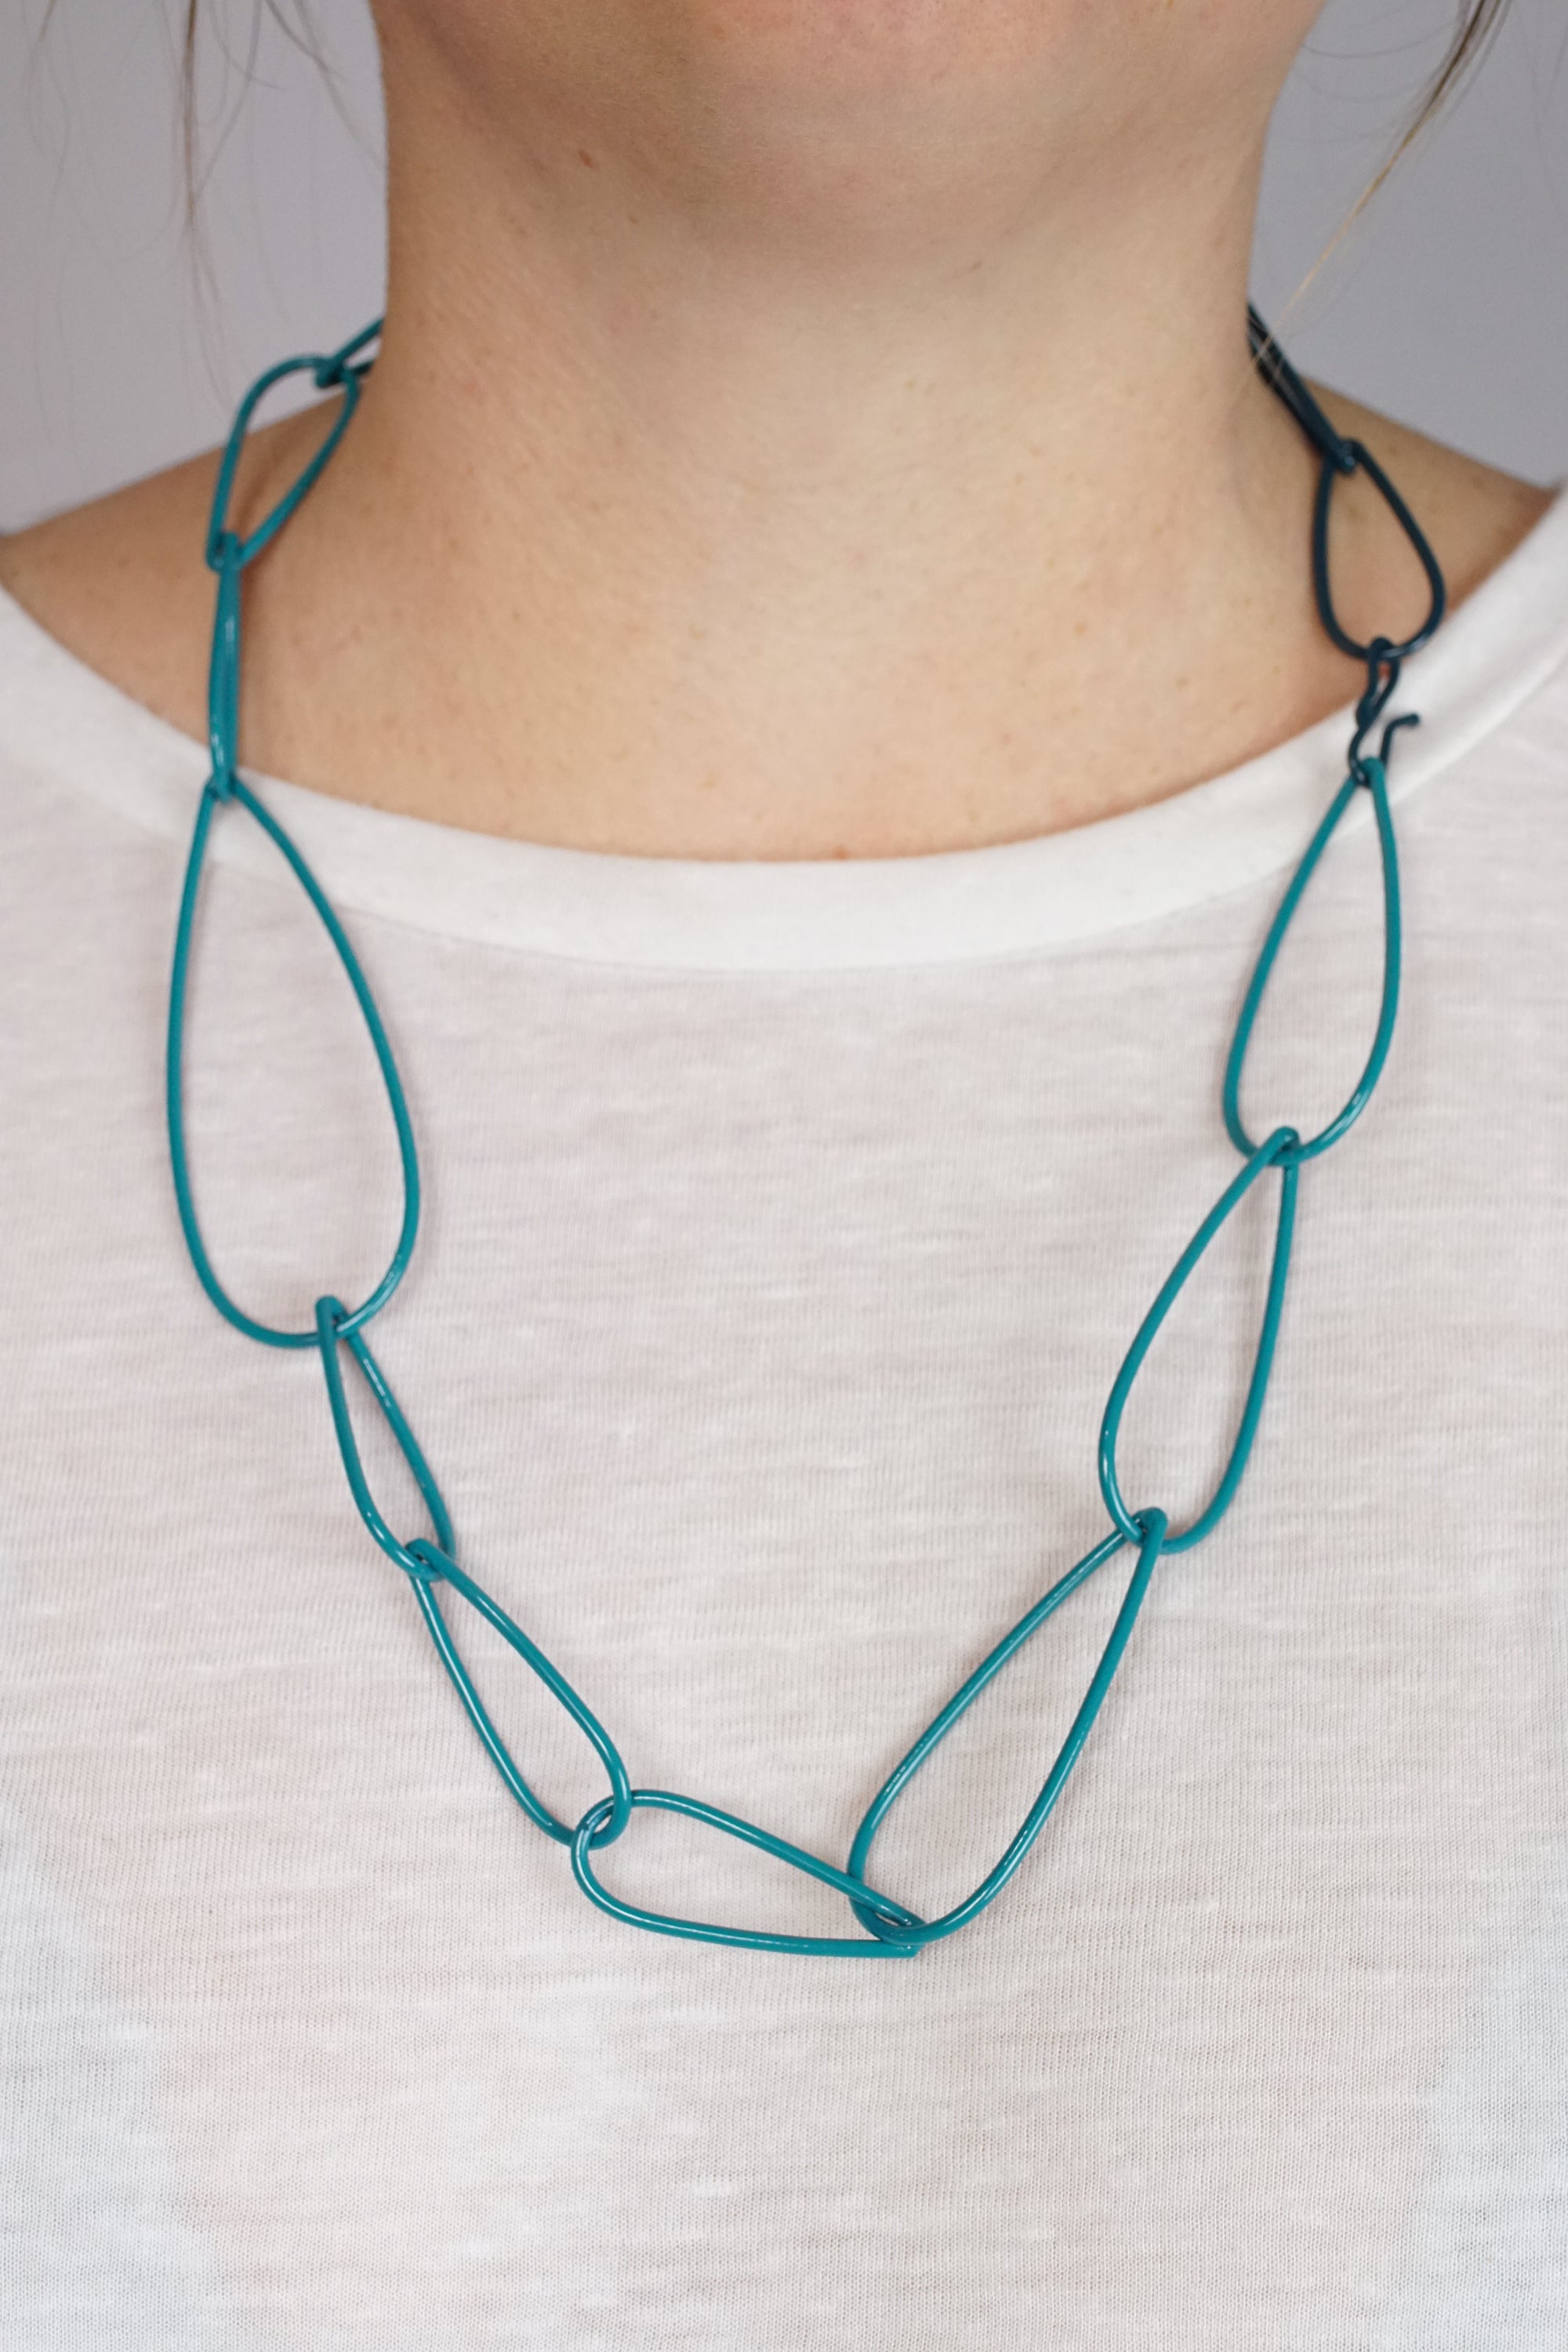 Modular Necklace in Bold Teal and Deep Ocean